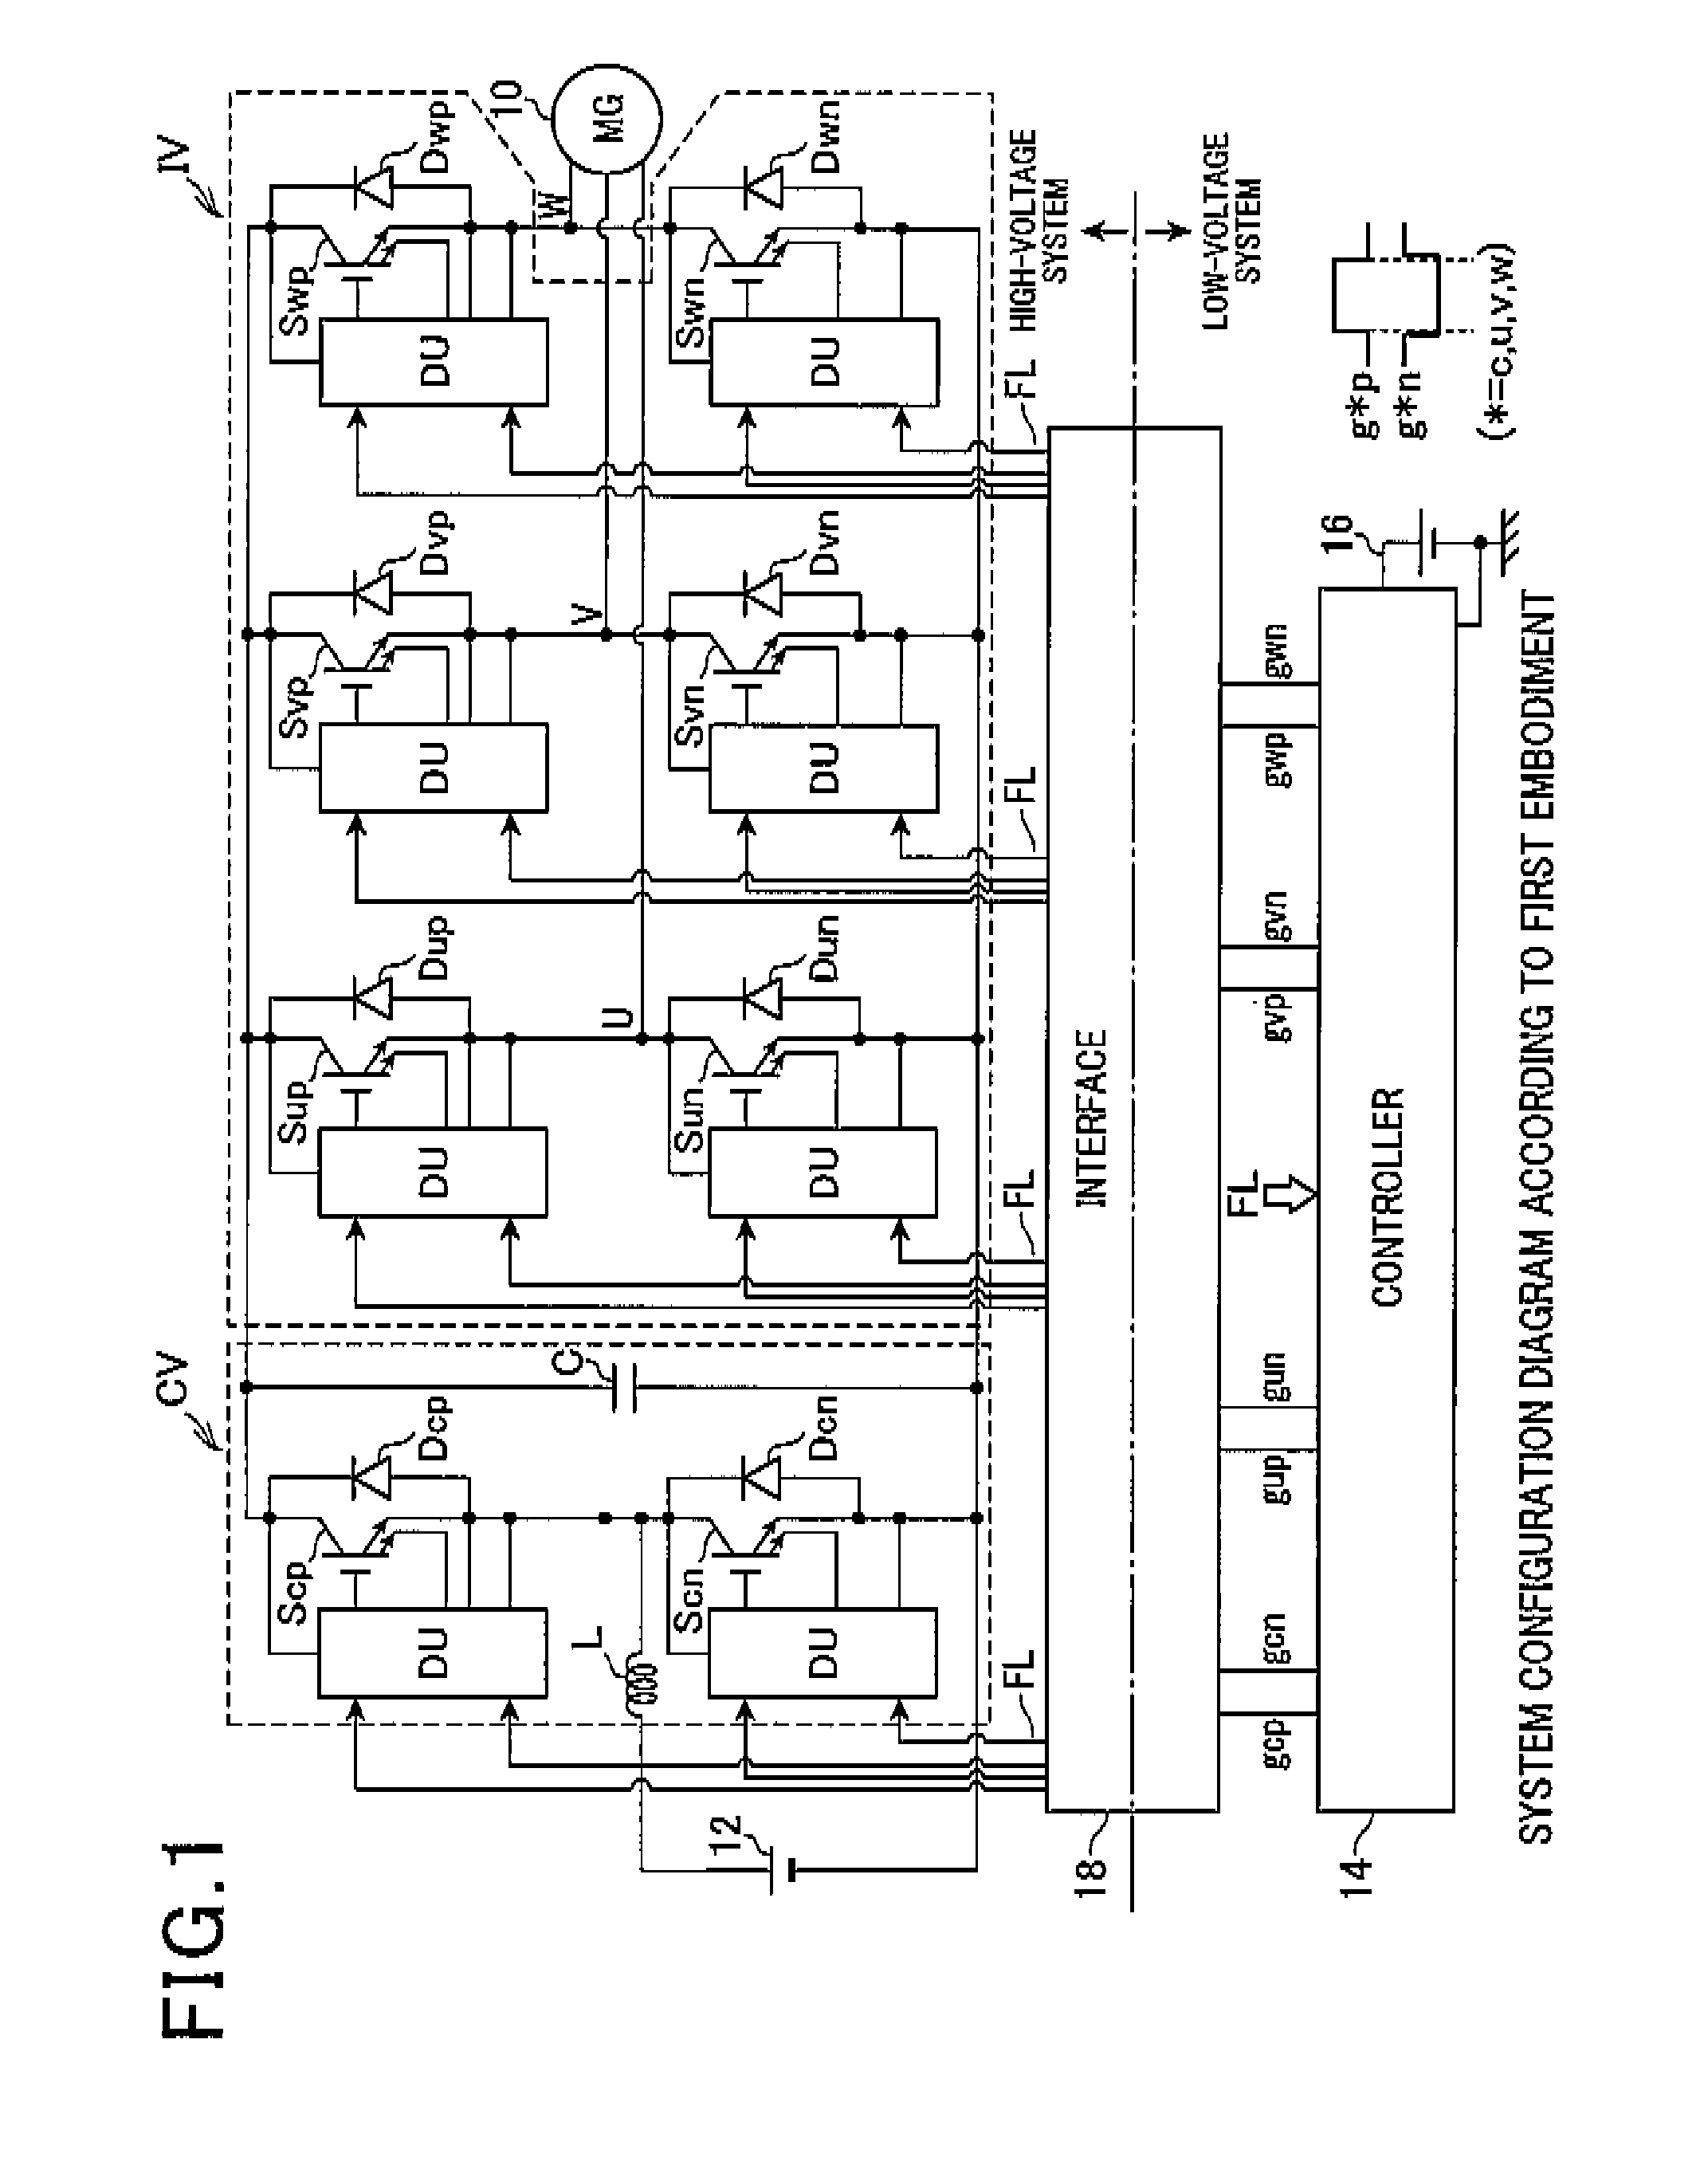 Drive unit for switching element and method thereof